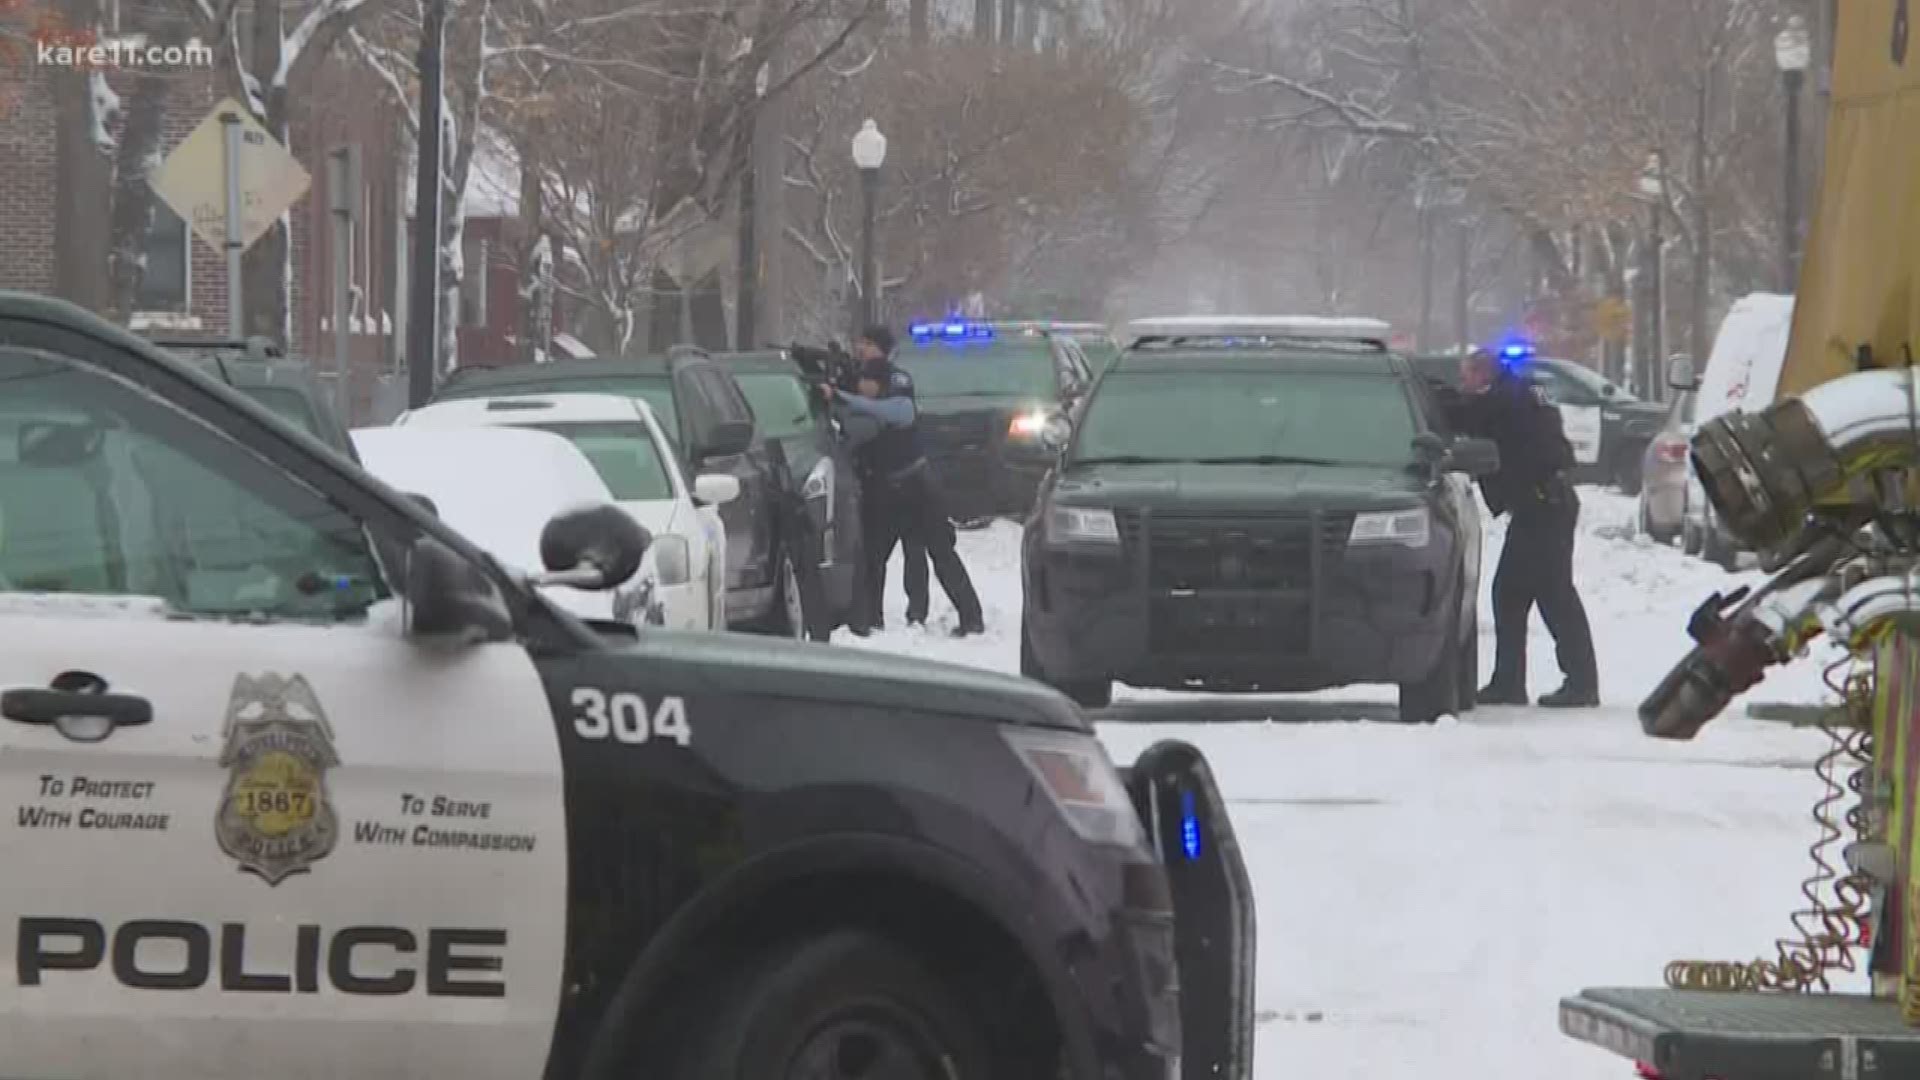 Minneapolis Police say four people were shot and killed, including two children, a woman and a gunman, Sunday morning in the city's south side.